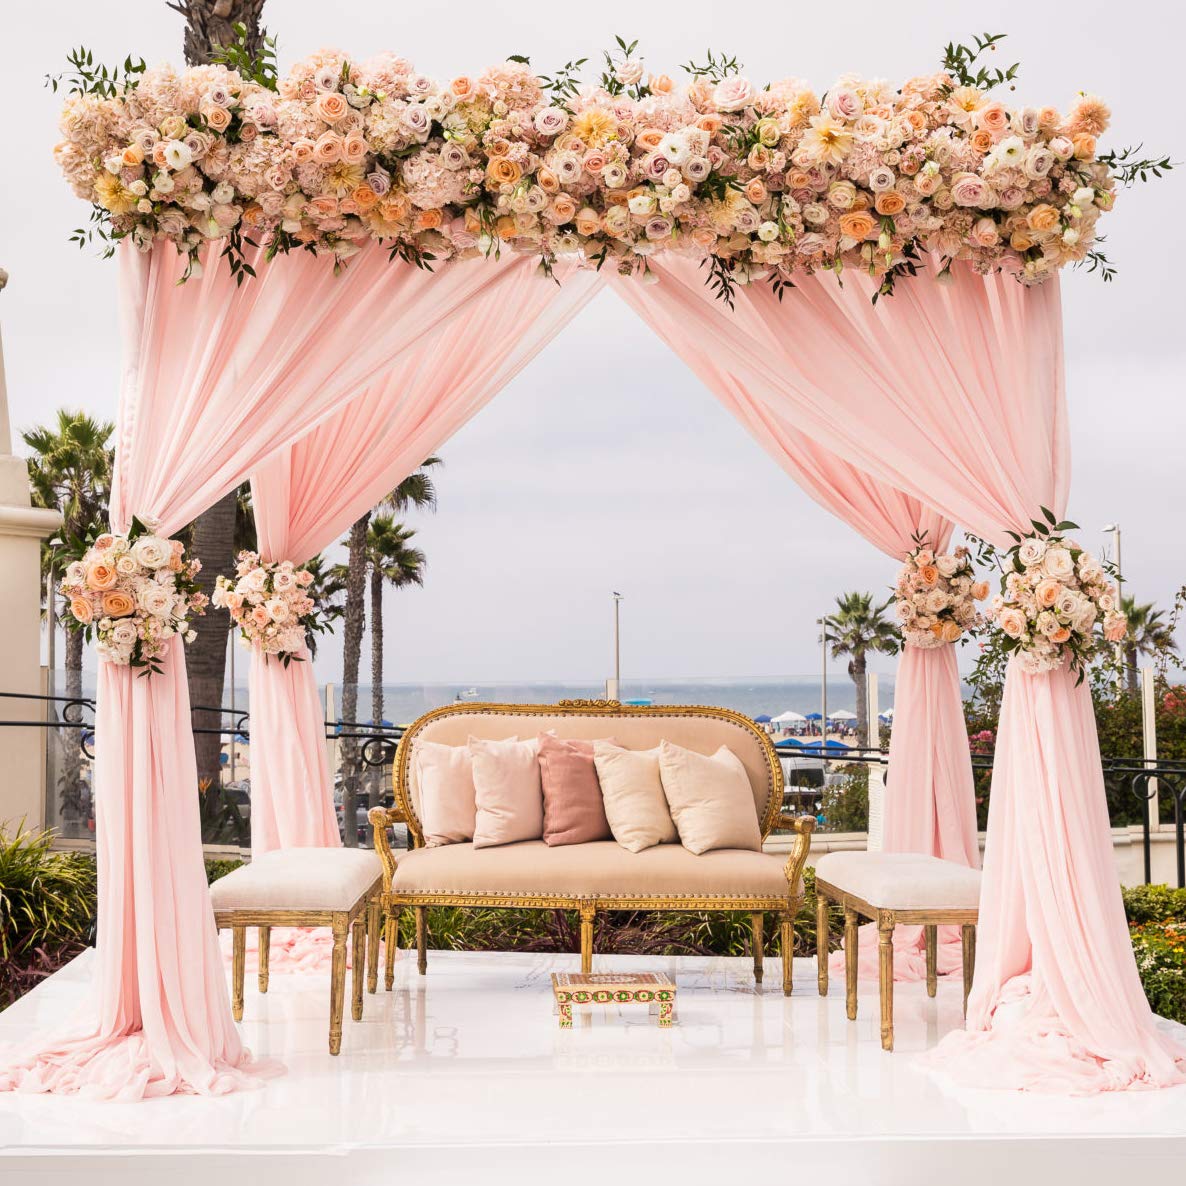 How to Decorate Wedding Columns With Chiffon